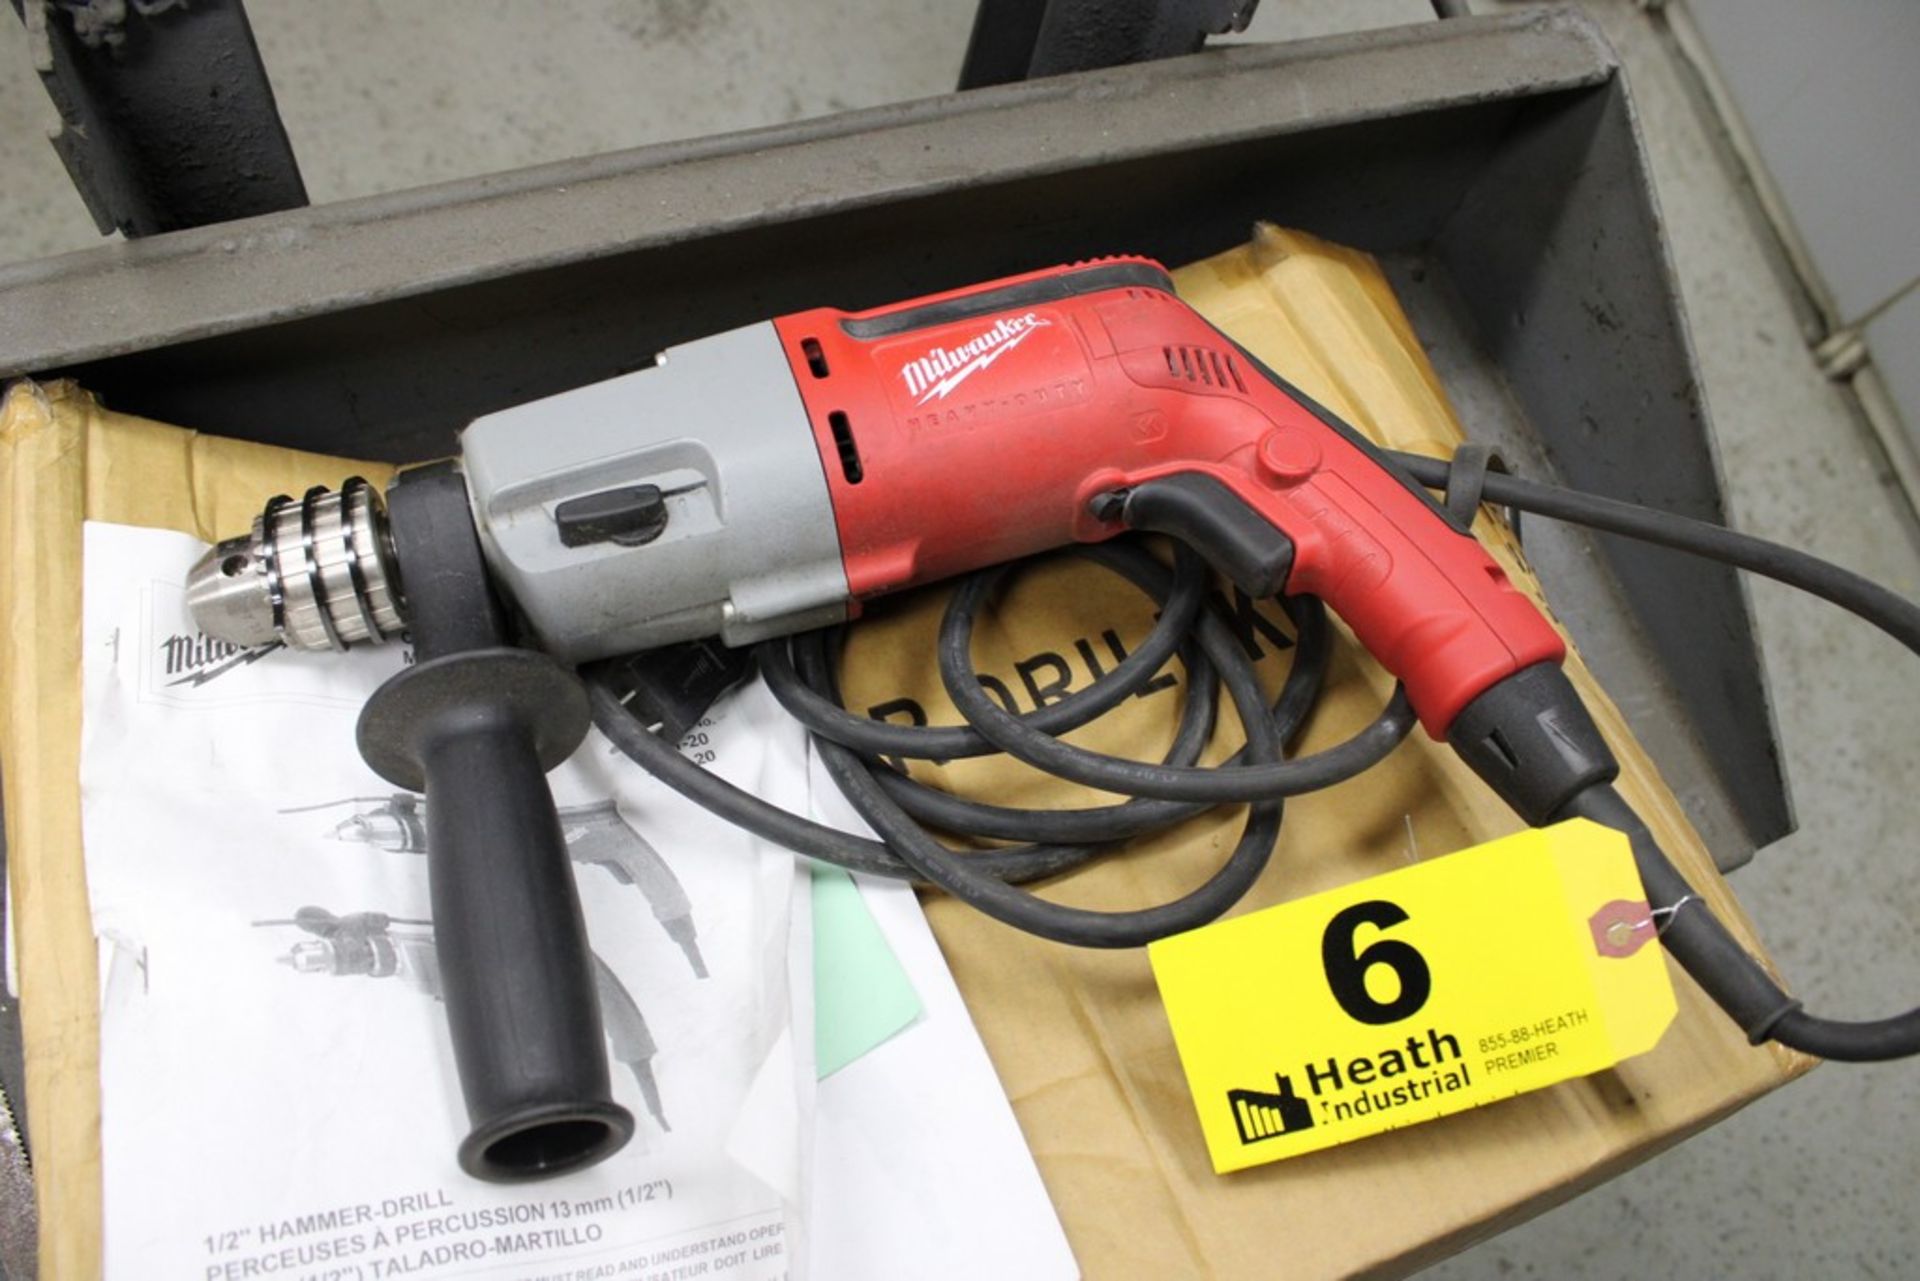 MILWAUKEE NO. 5387-20 1/2 ELECTRIC HAMMER DRILL